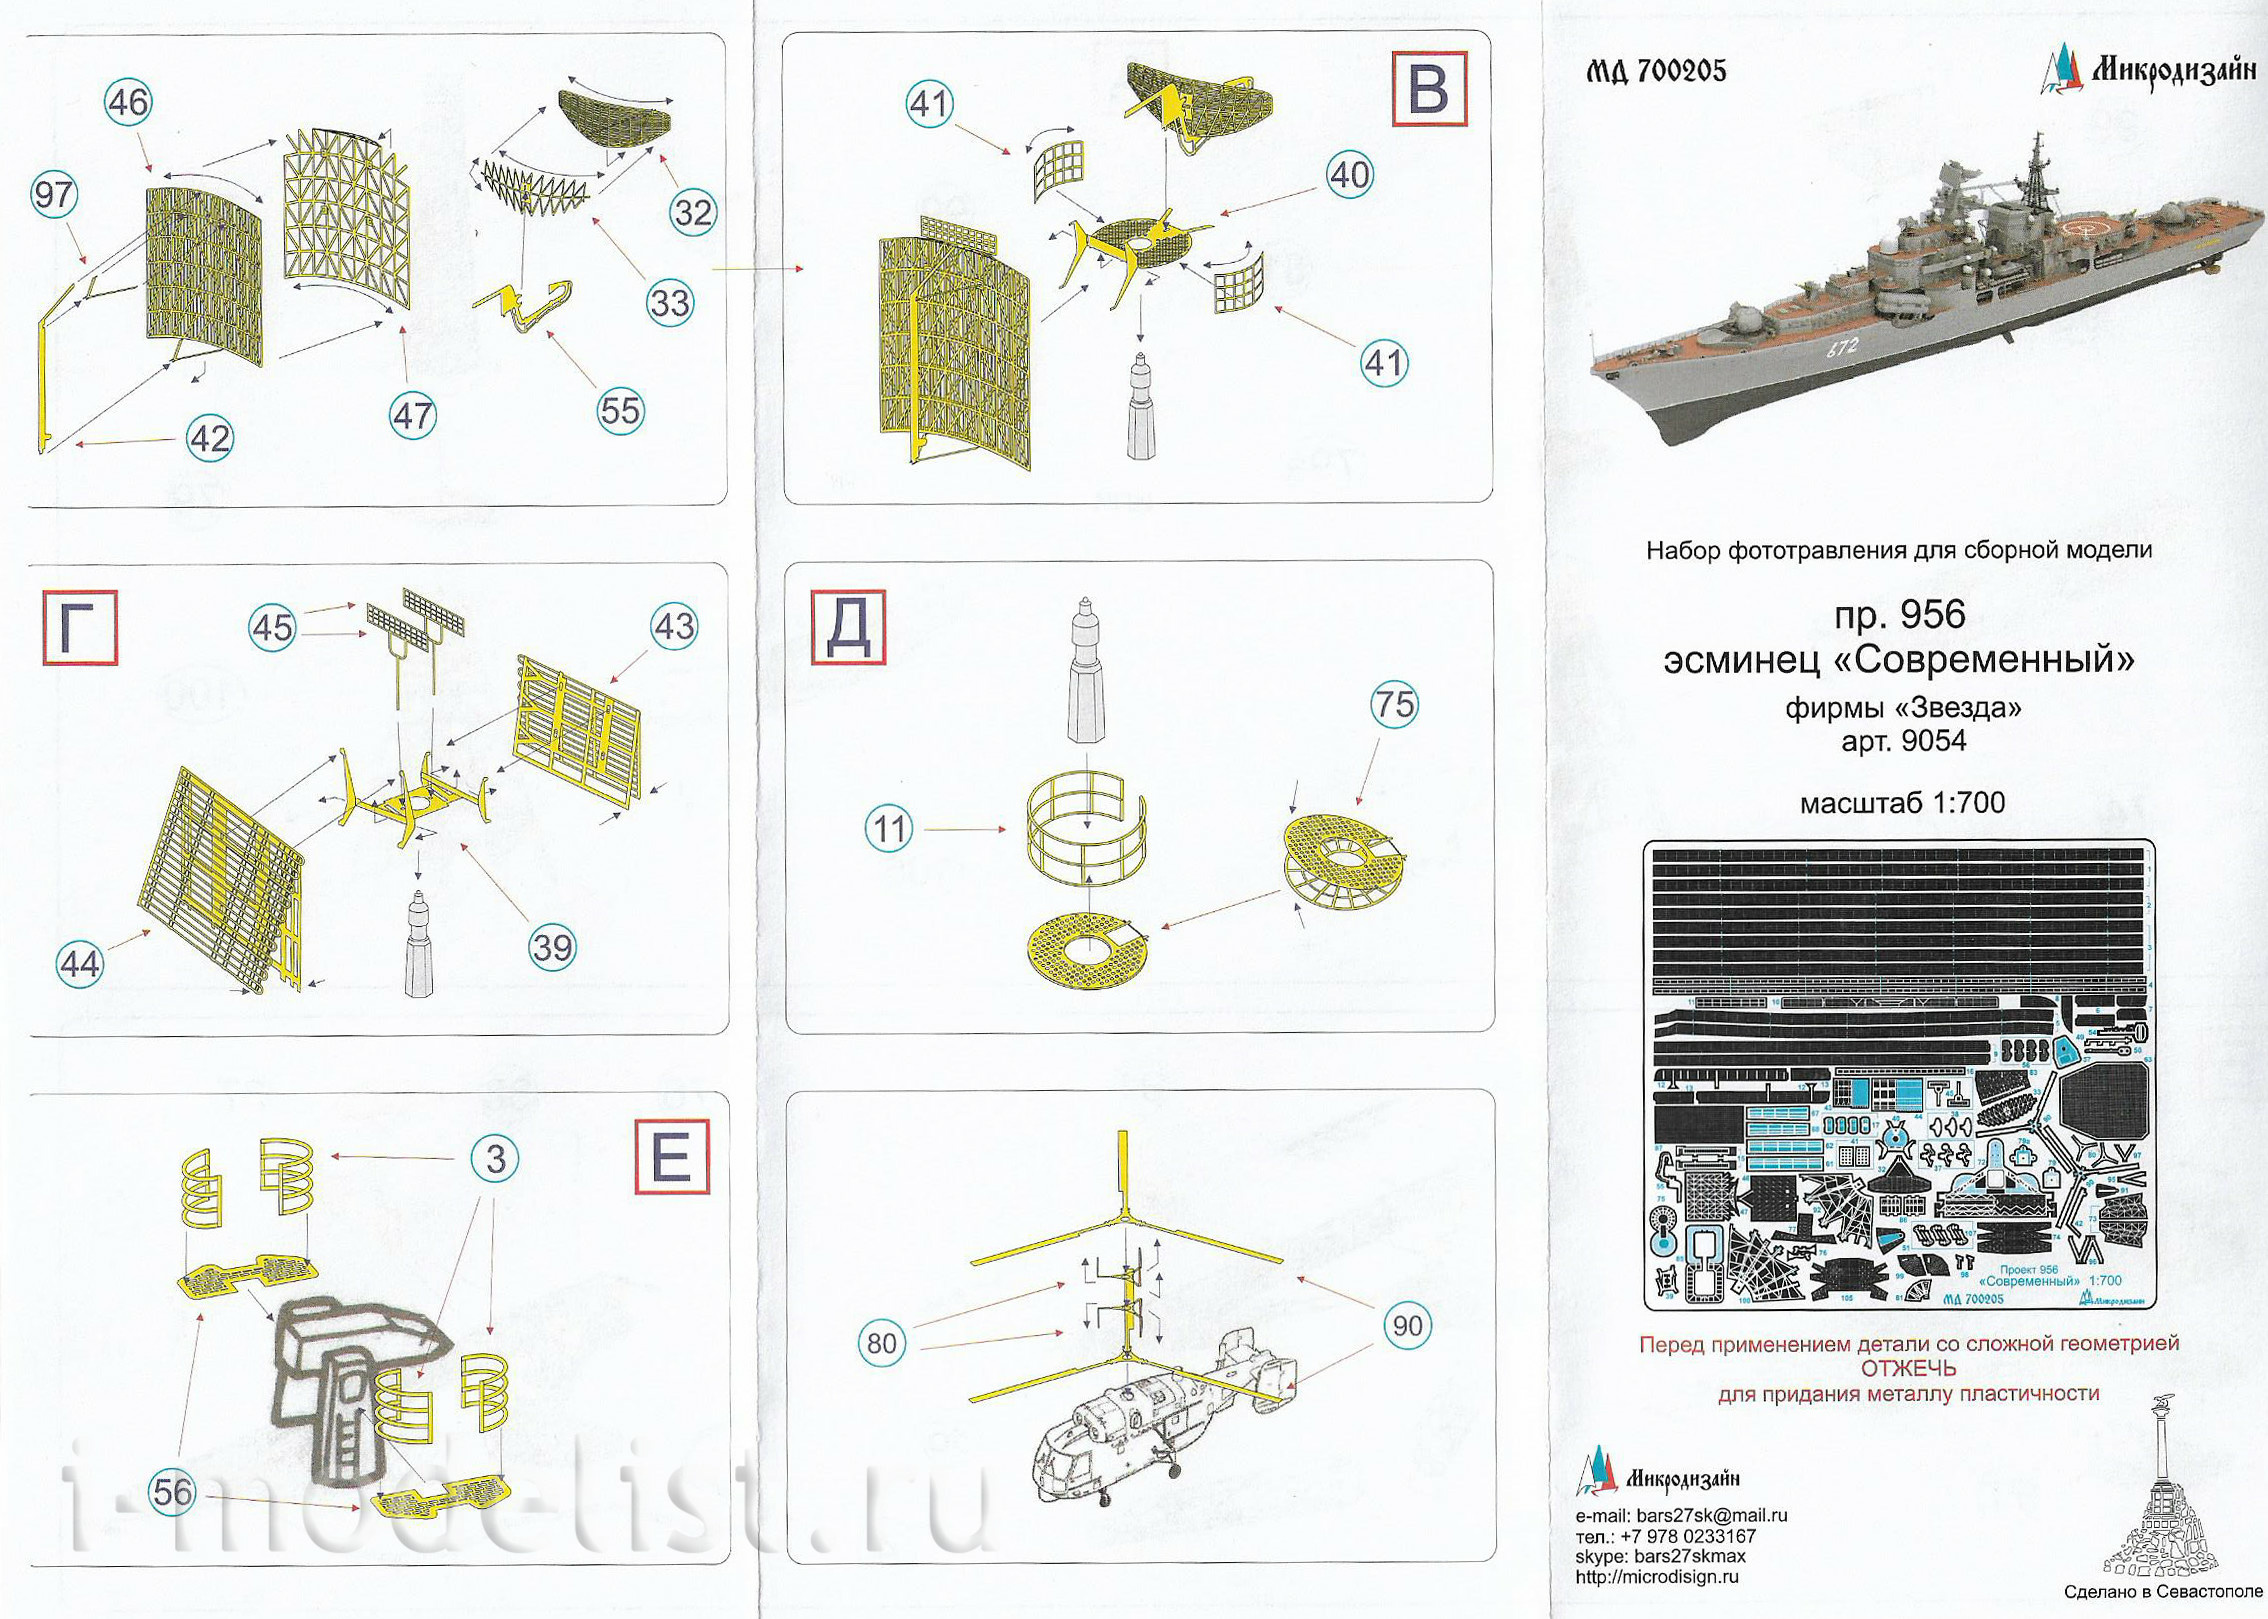 700205 Microdesign 1/700 set of photo etching for the destroyer 